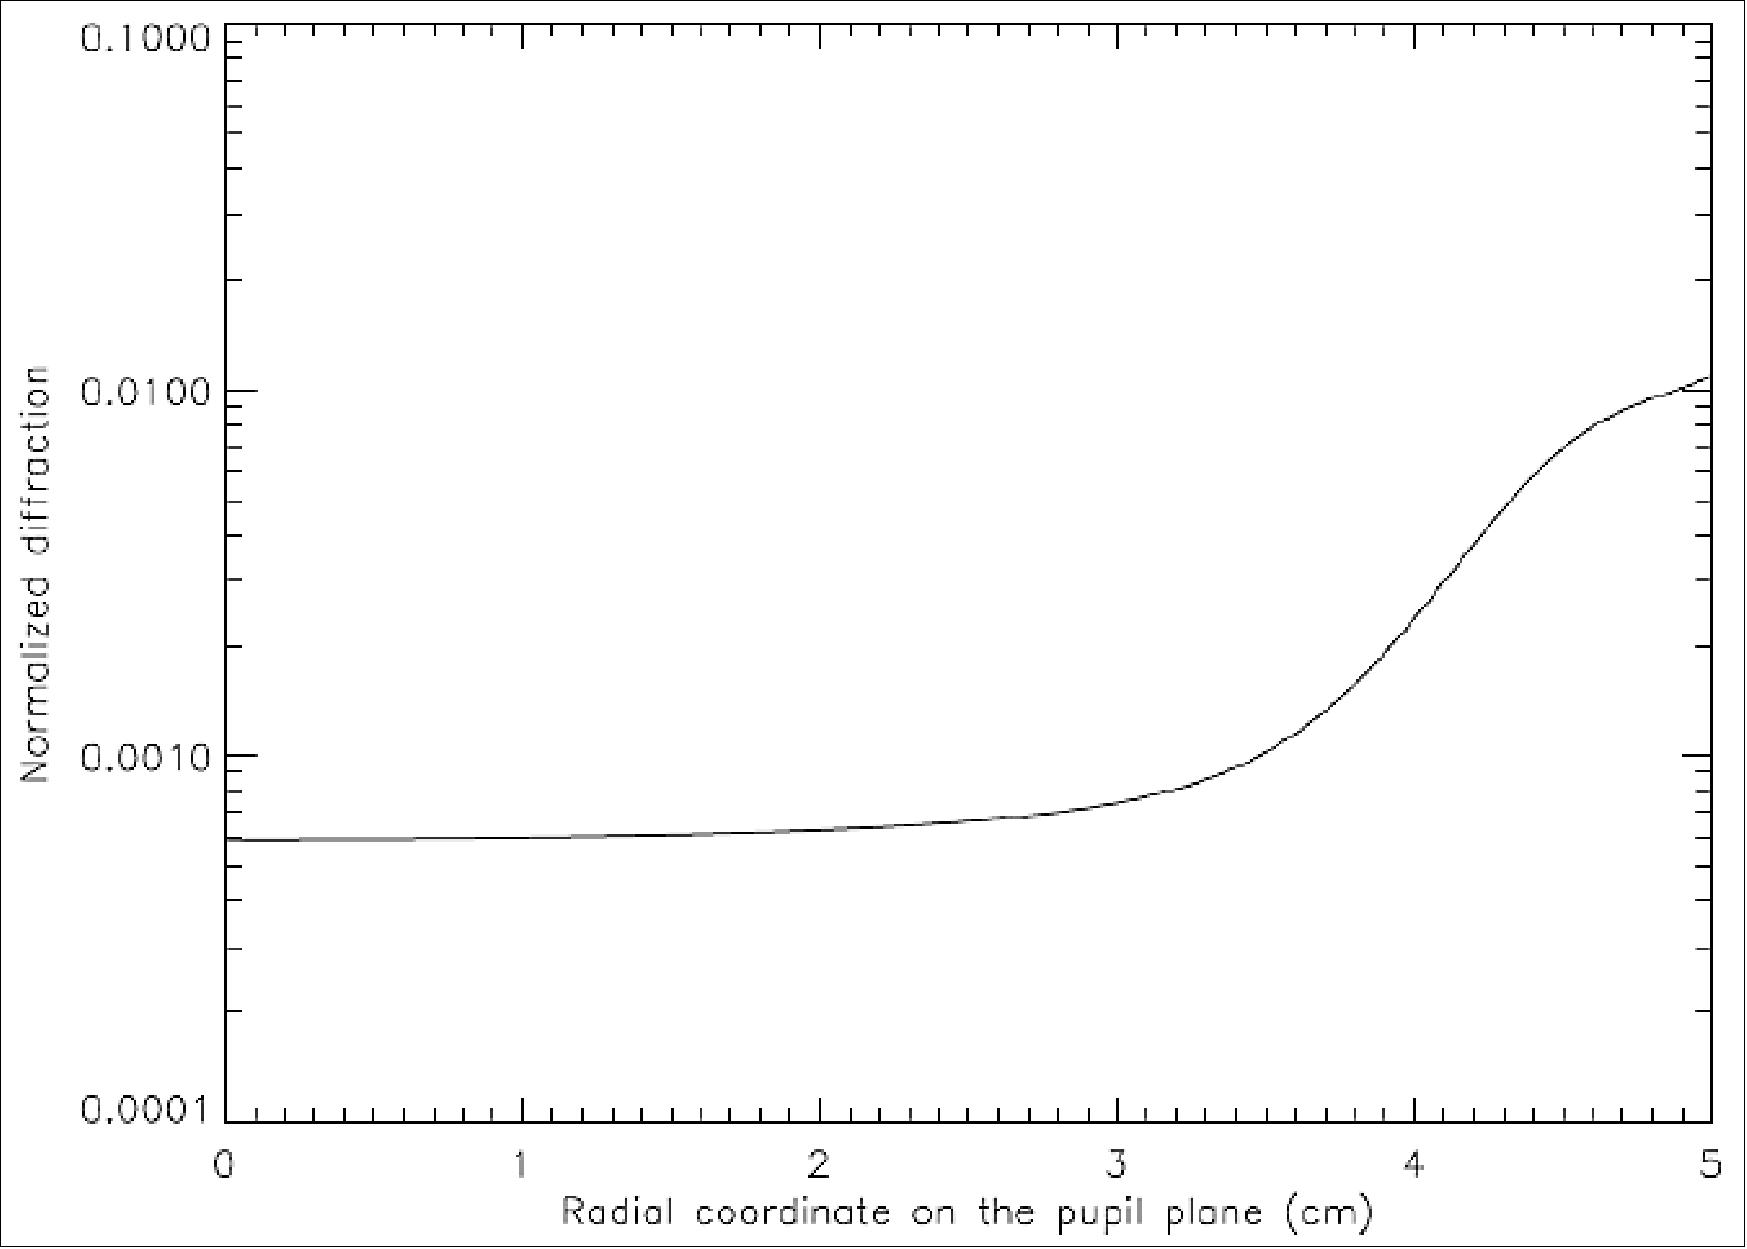 Figure 43: Normalized profile of the light diffracted by the external occulter in the entrance pupil (image credit: ASPIICS consortium)